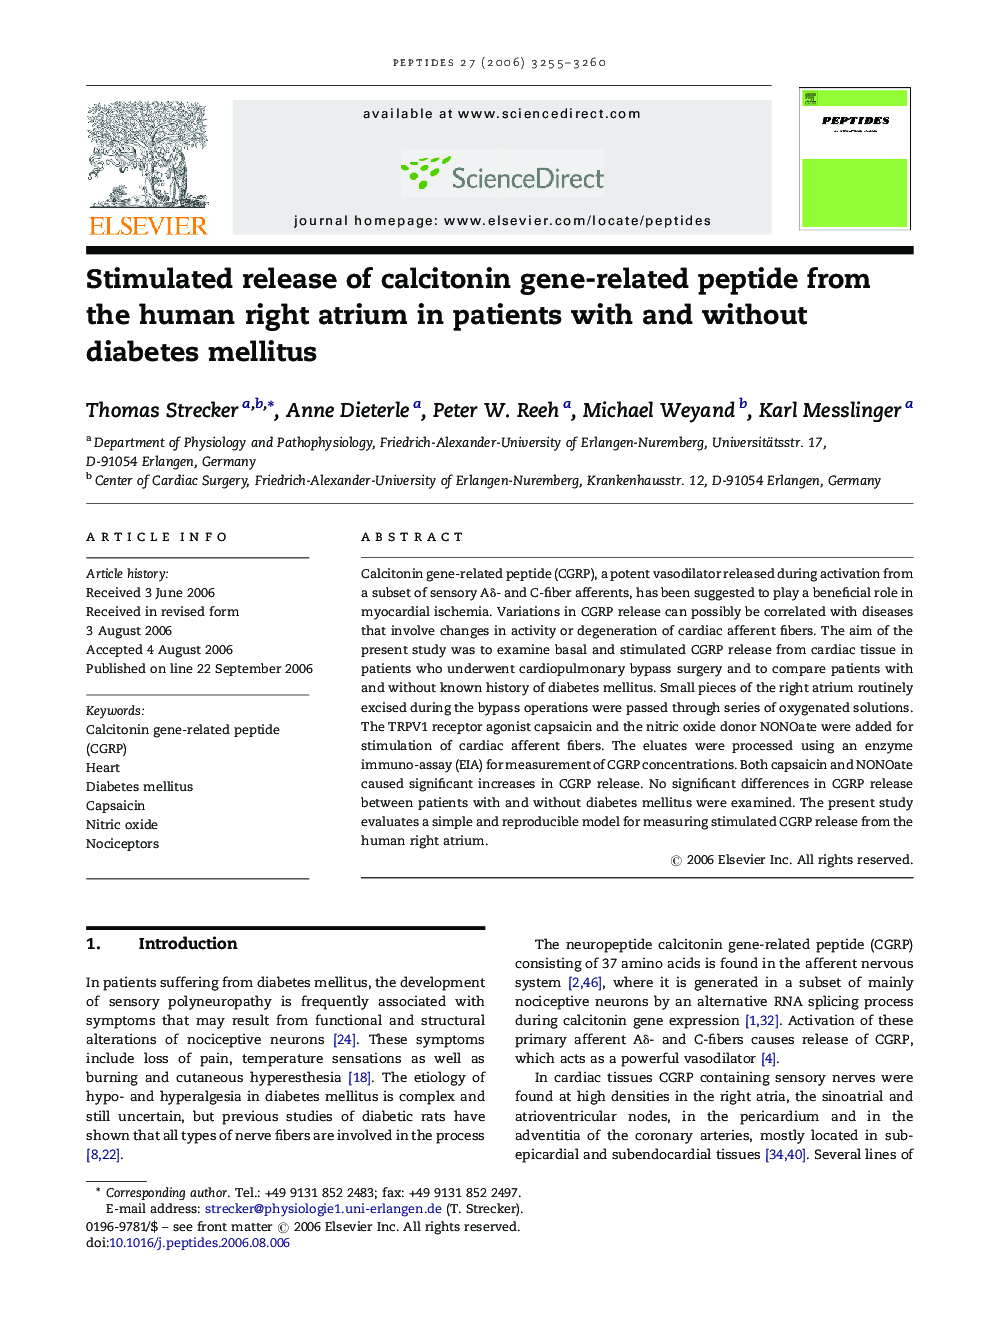 Stimulated release of calcitonin gene-related peptide from the human right atrium in patients with and without diabetes mellitus